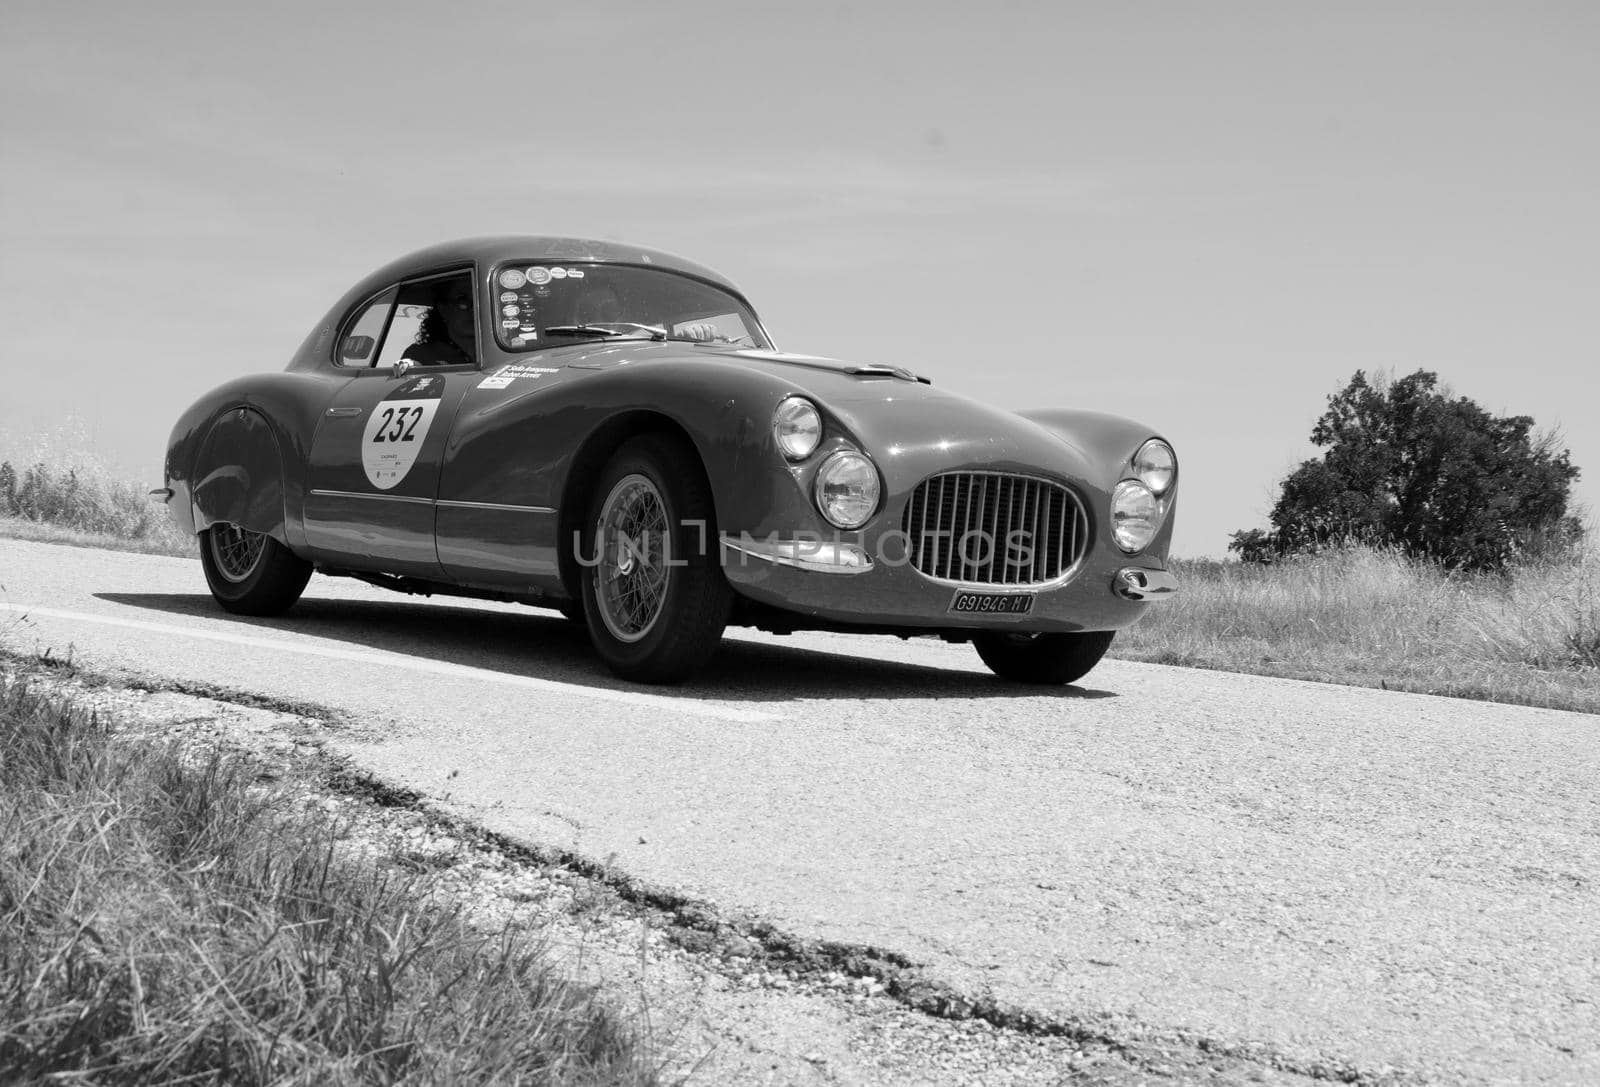 URBINO - ITALY - JUN 16 - 2022 : FIAT 8V BERLINETTA 1952 on an old racing car in rally Mille Miglia 2022 the famous italian historical race (1927-1957